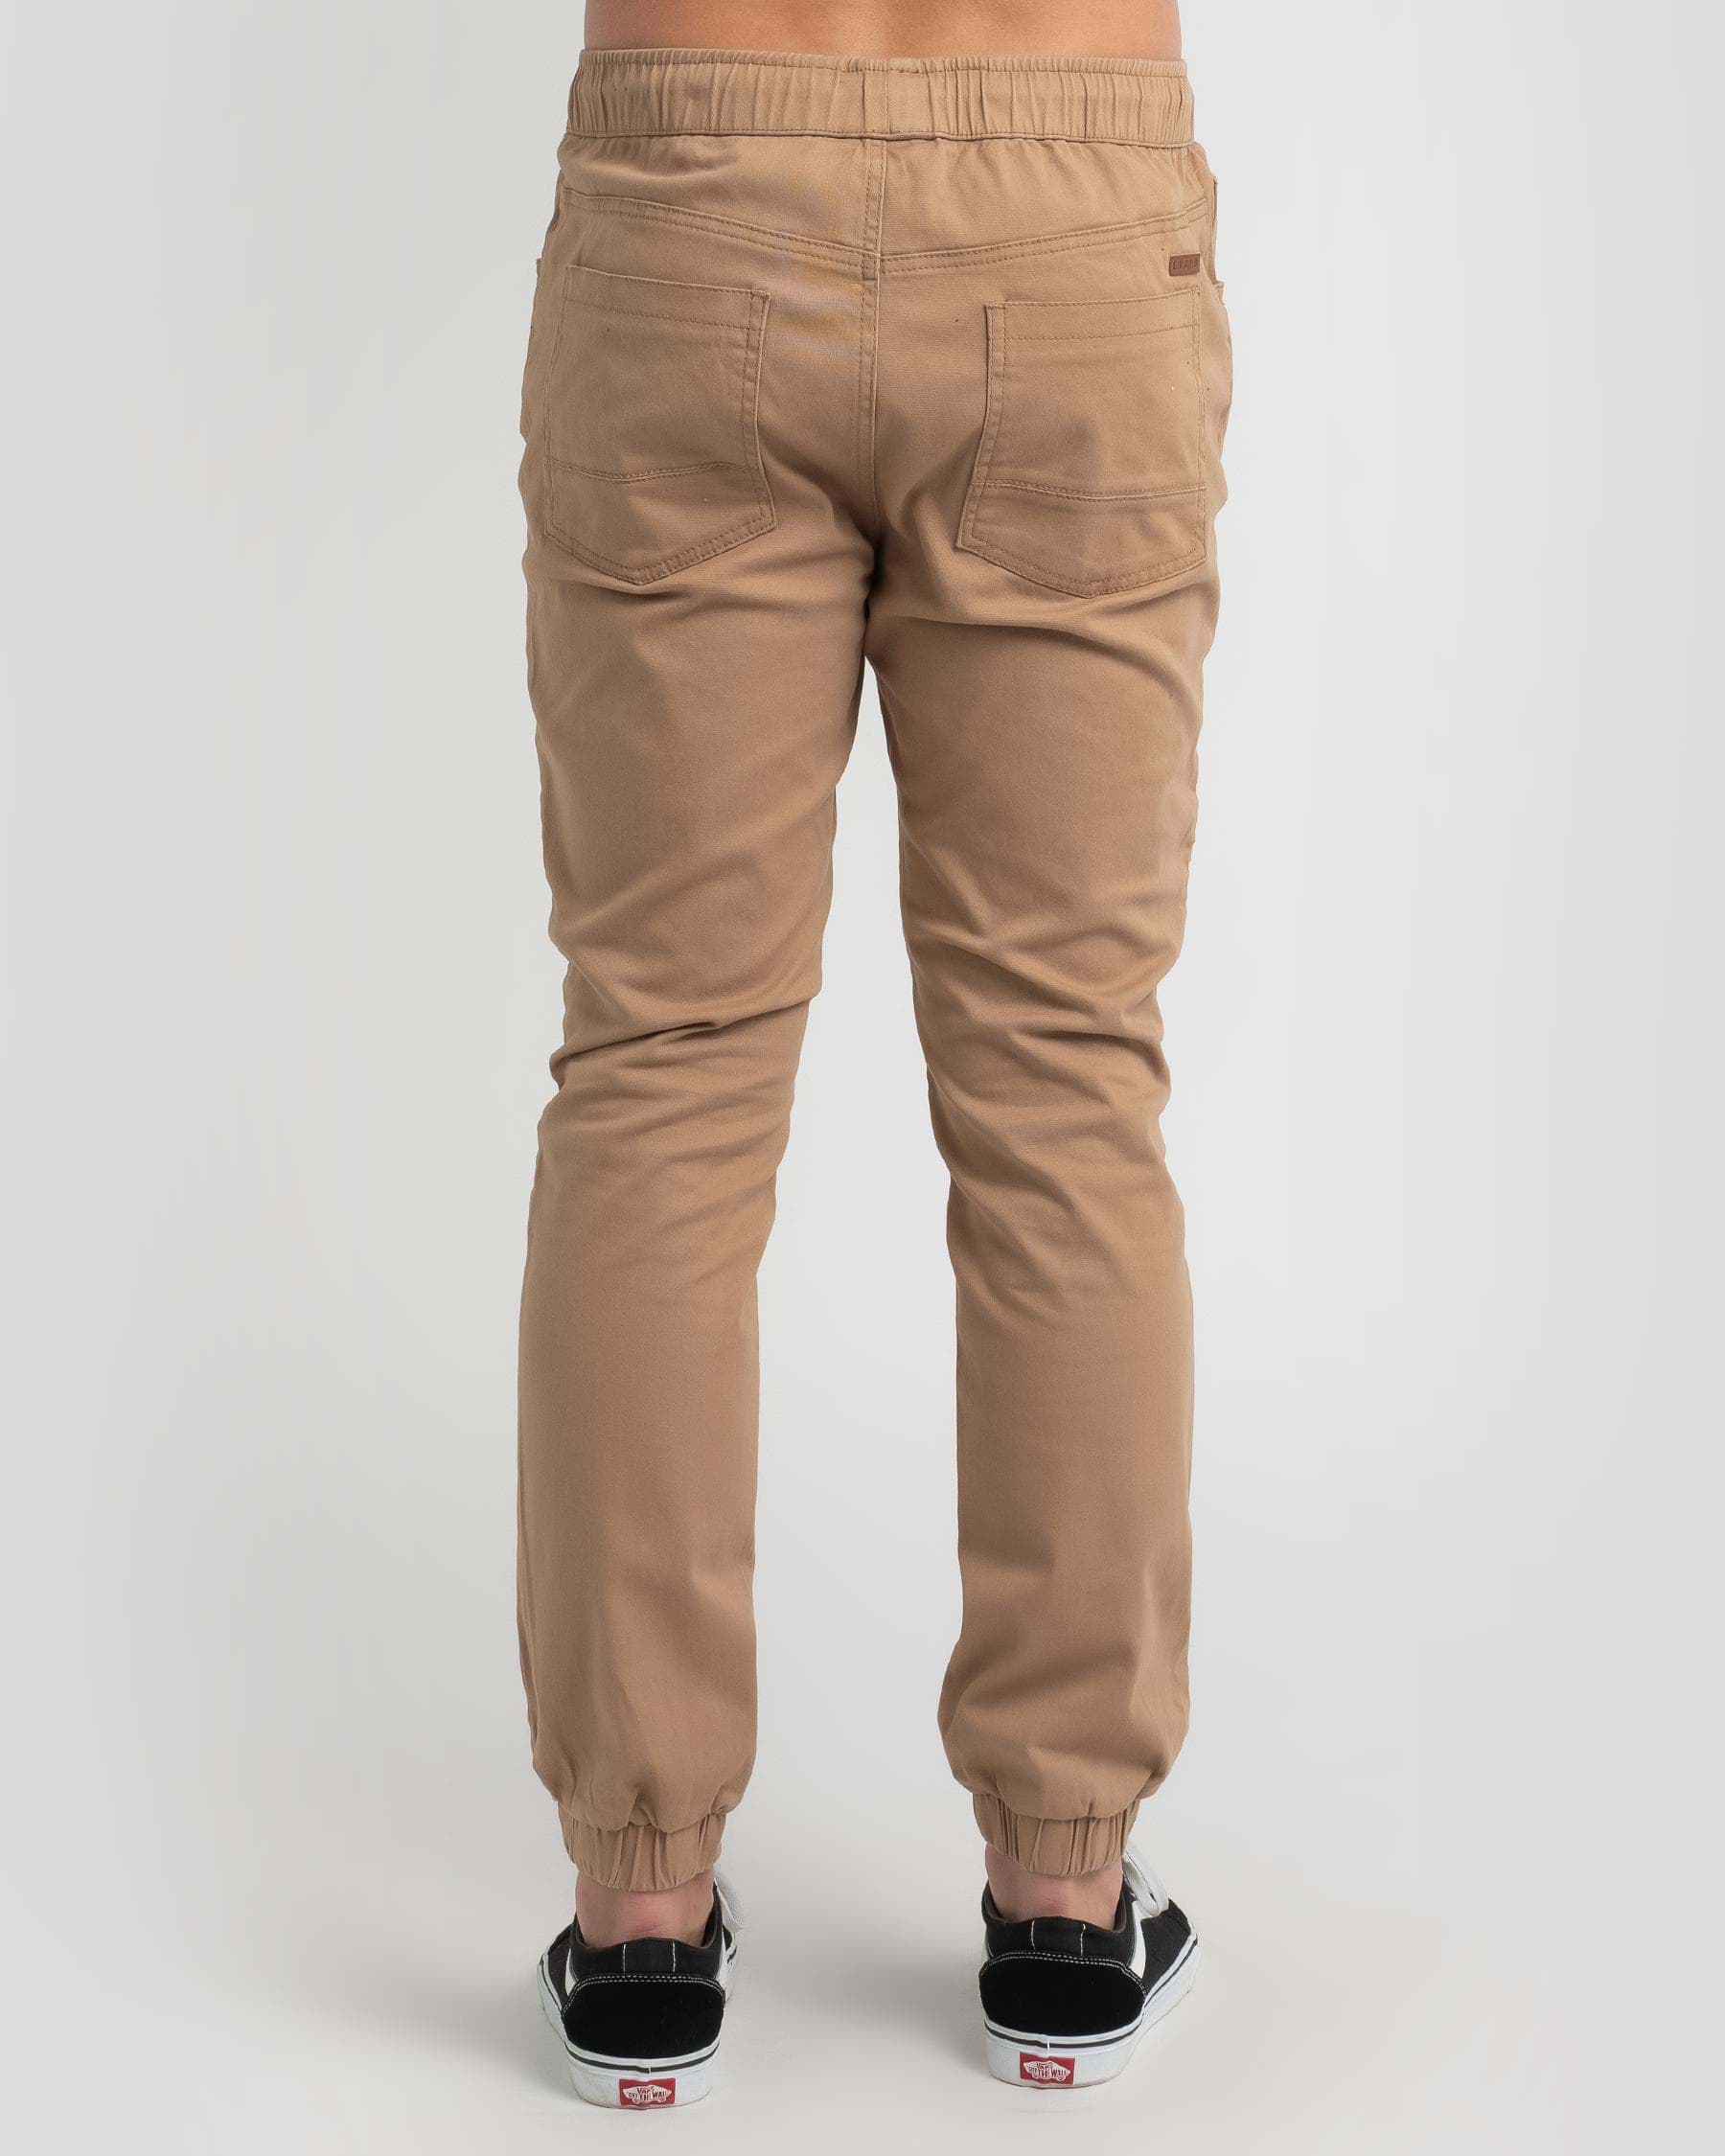 Lucid Construct Jogger Pants In Tan - Fast Shipping & Easy Returns ...